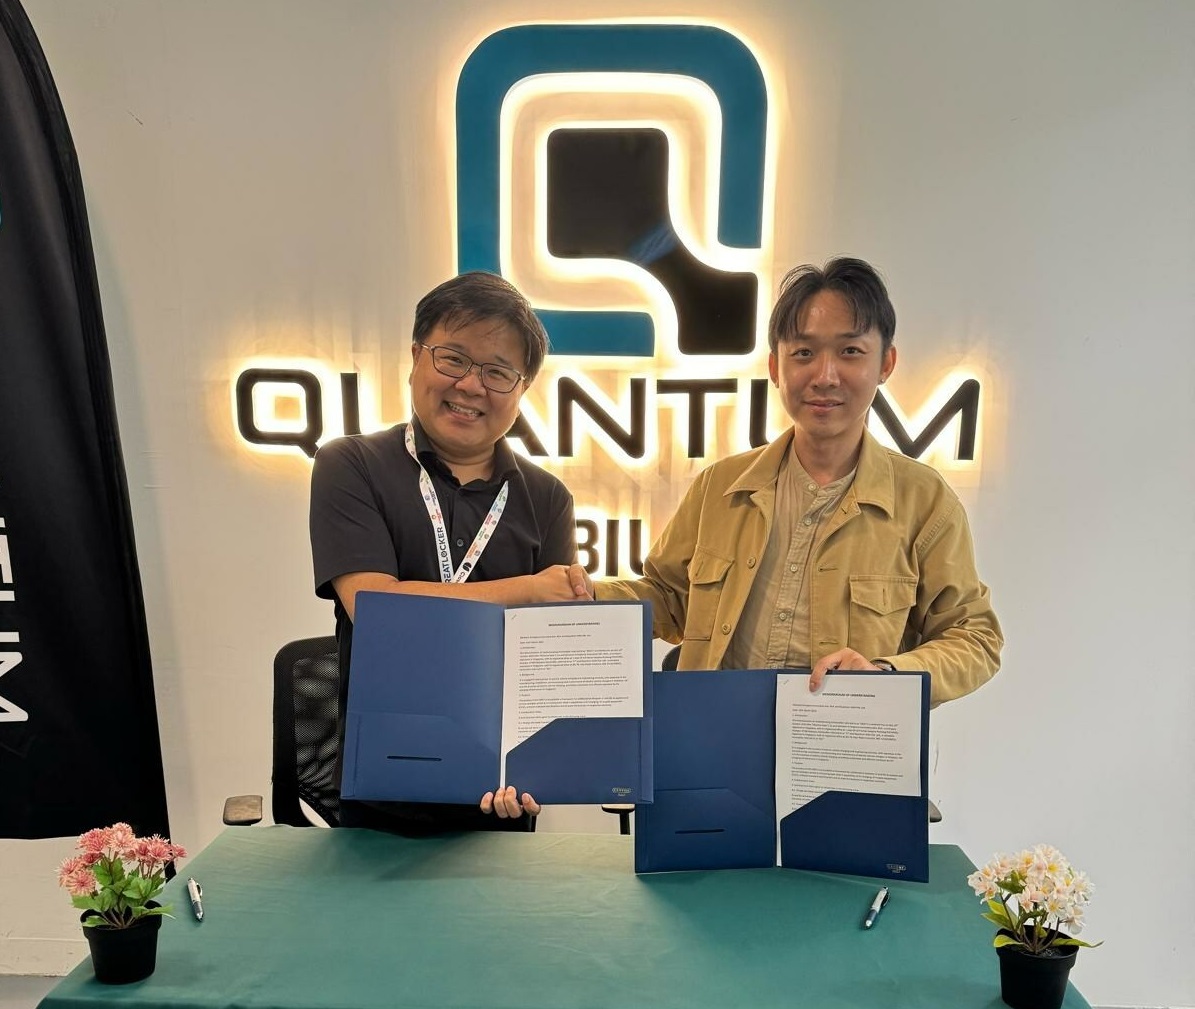 Quantum Volts CEO Lawrence Oei (left) and Emergence Innovative founder Kray Chong making the announcement that they will form a strategic alliance for EV charging innovations. Photo: Quantum Volts